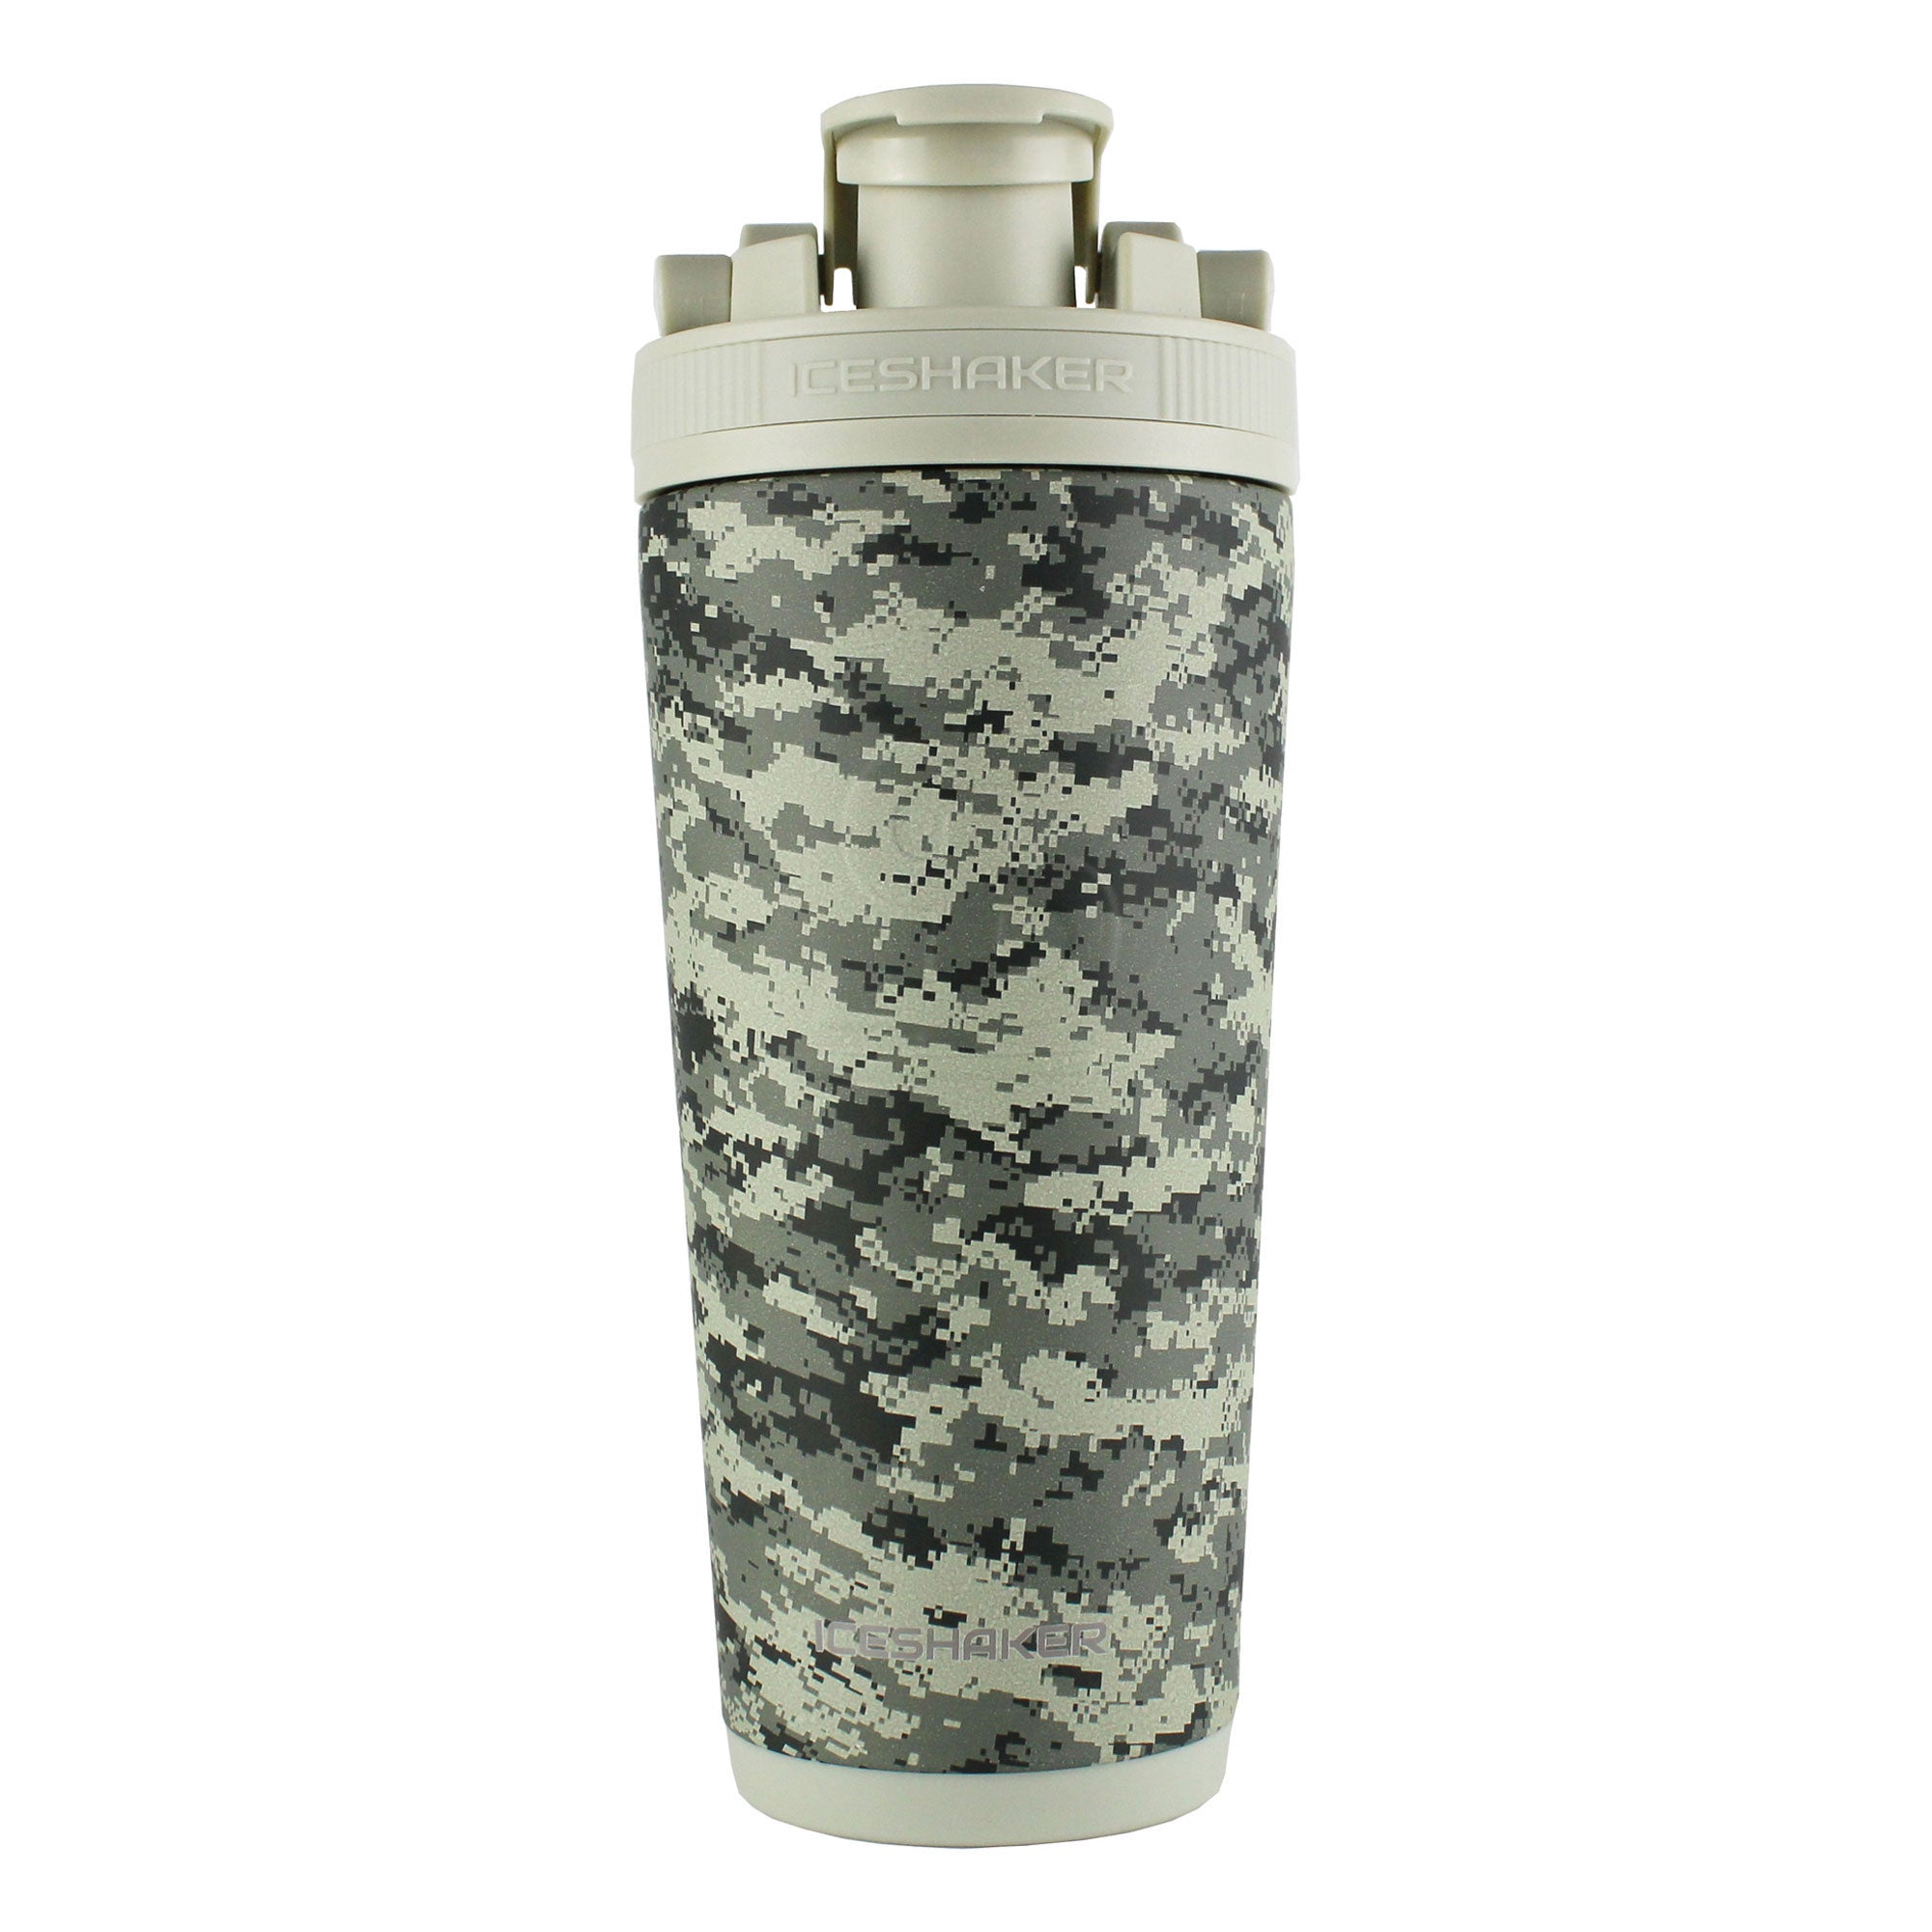 FIT2SERVE As Much Rest As Possible 26oz Ice Shaker - US Army Camo